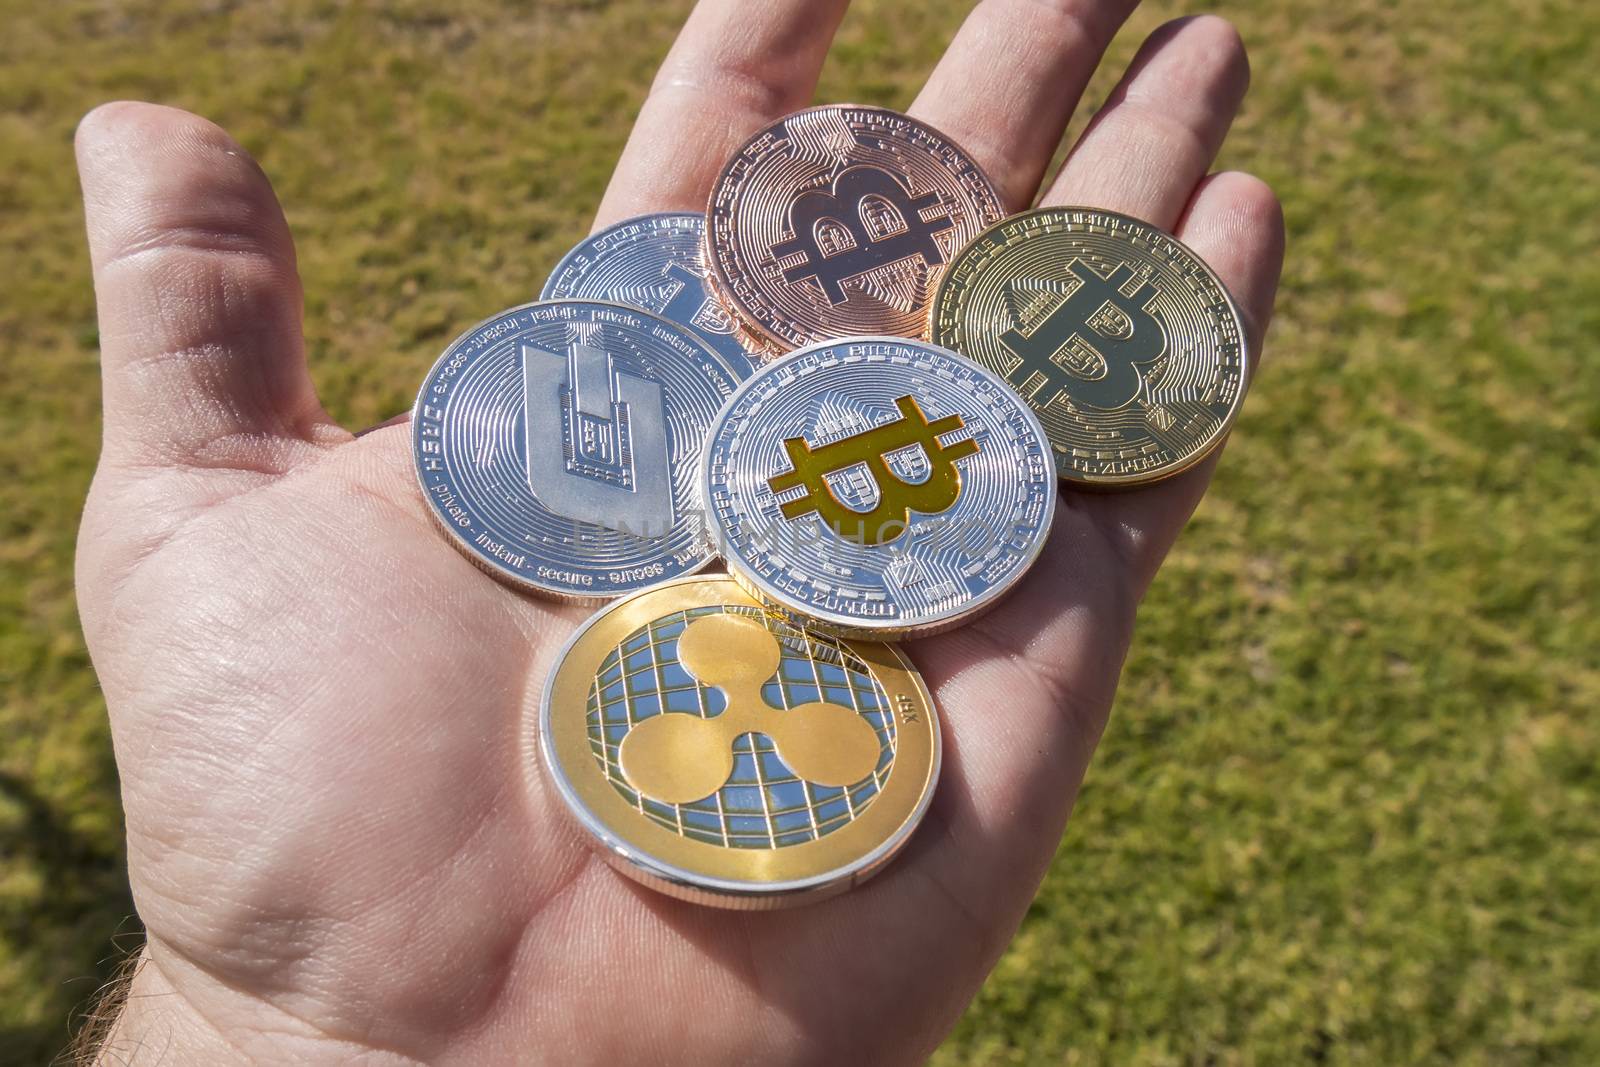 Cryptocurrency coins in a hand; Bitcoin, Ripple, Dash